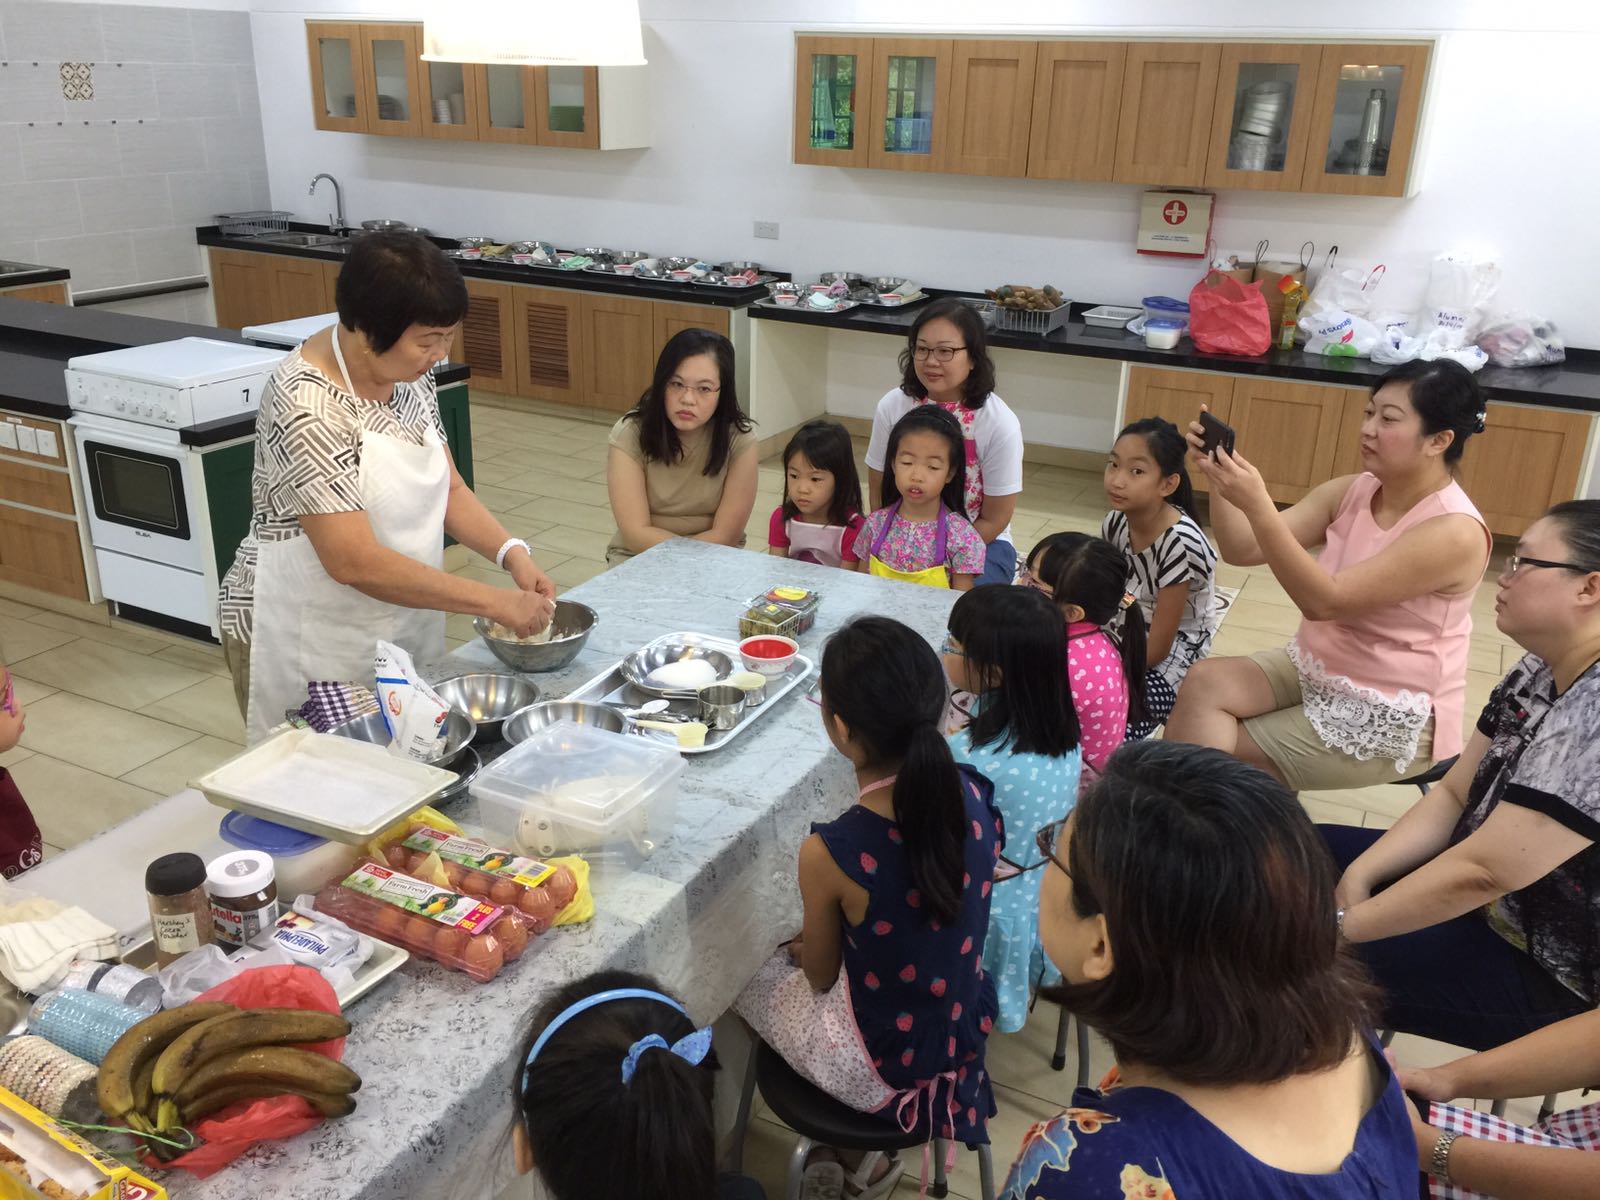 Keep Calm and Cook On with Mrs. Florence Phuah (this event is open to children as well)